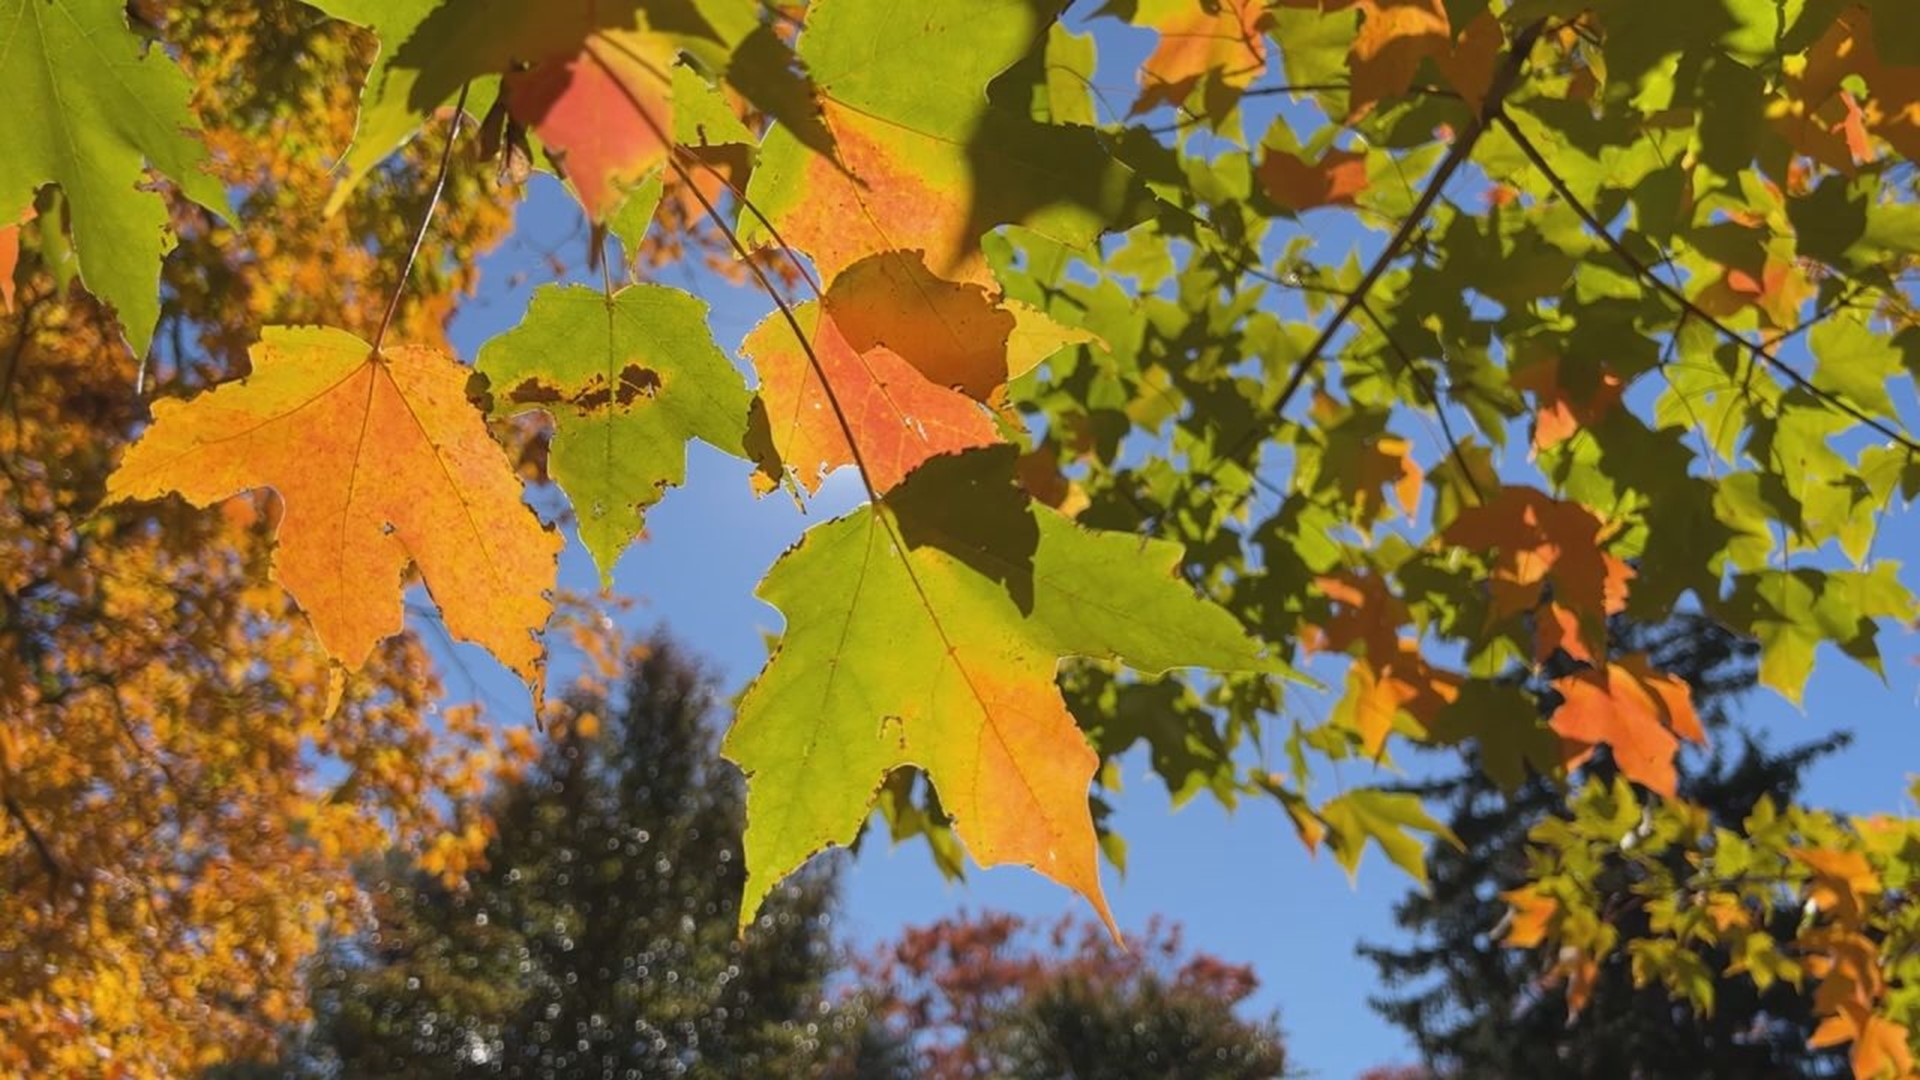 The Harrisburg area is seeing on average 11 more freeze-free days in the fall now than it did 50 years ago. This allows for a longer allergy season.